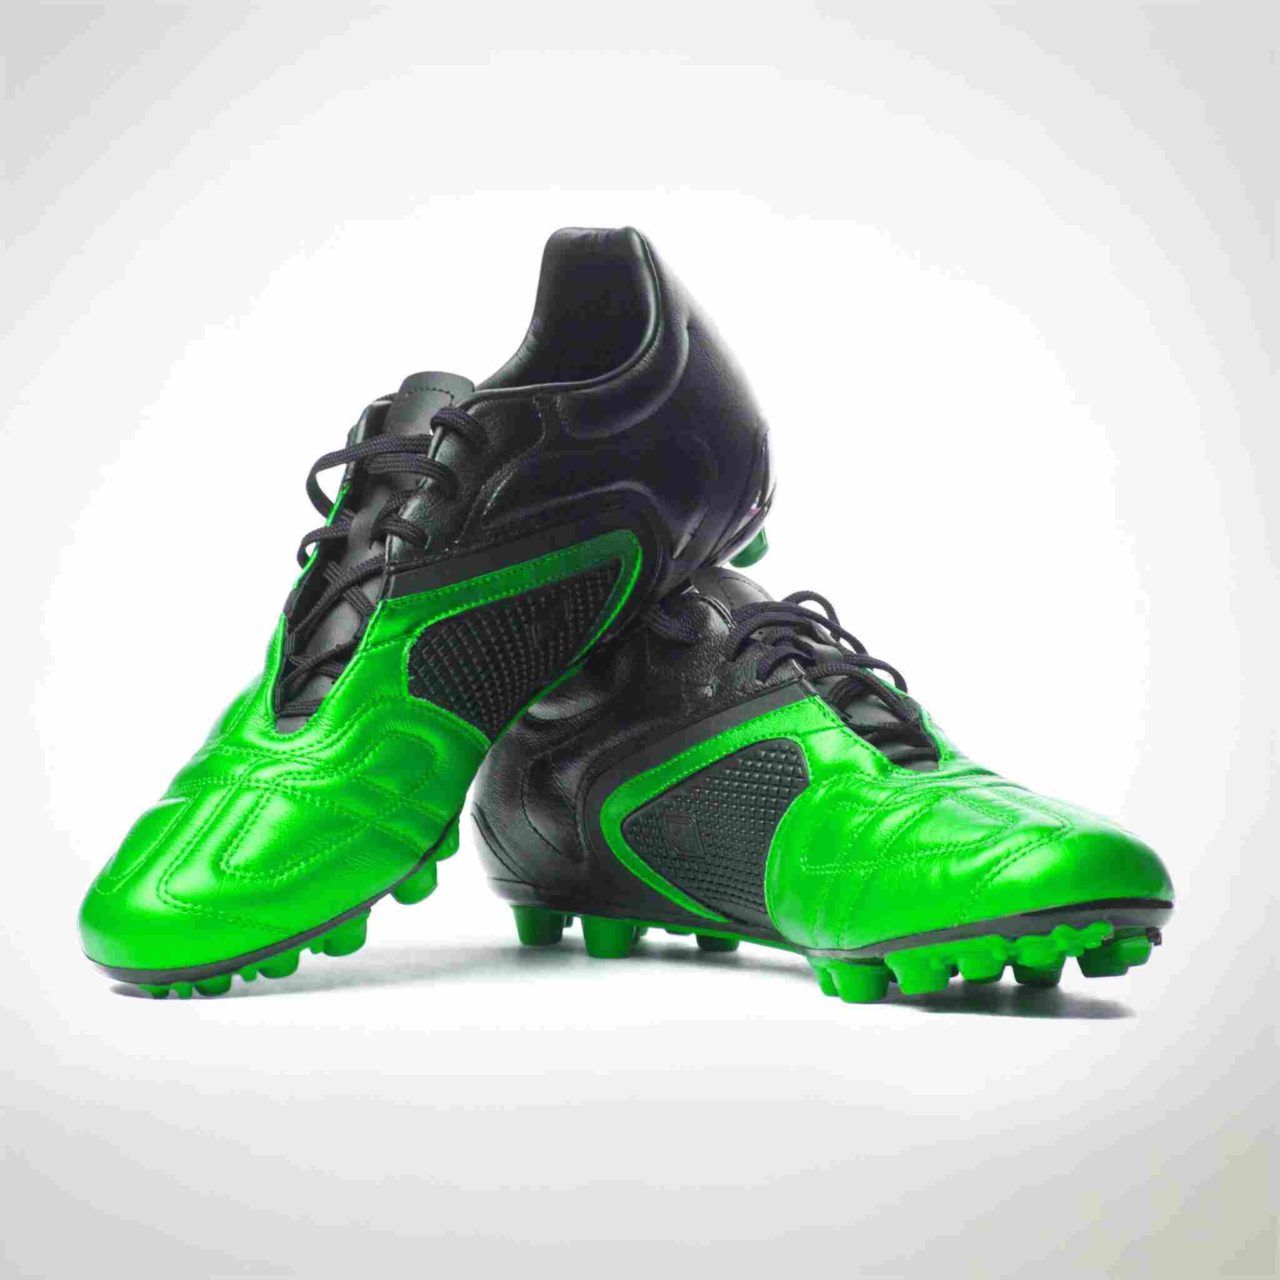 product-green-soccer-shoes-1280x1280.jpg